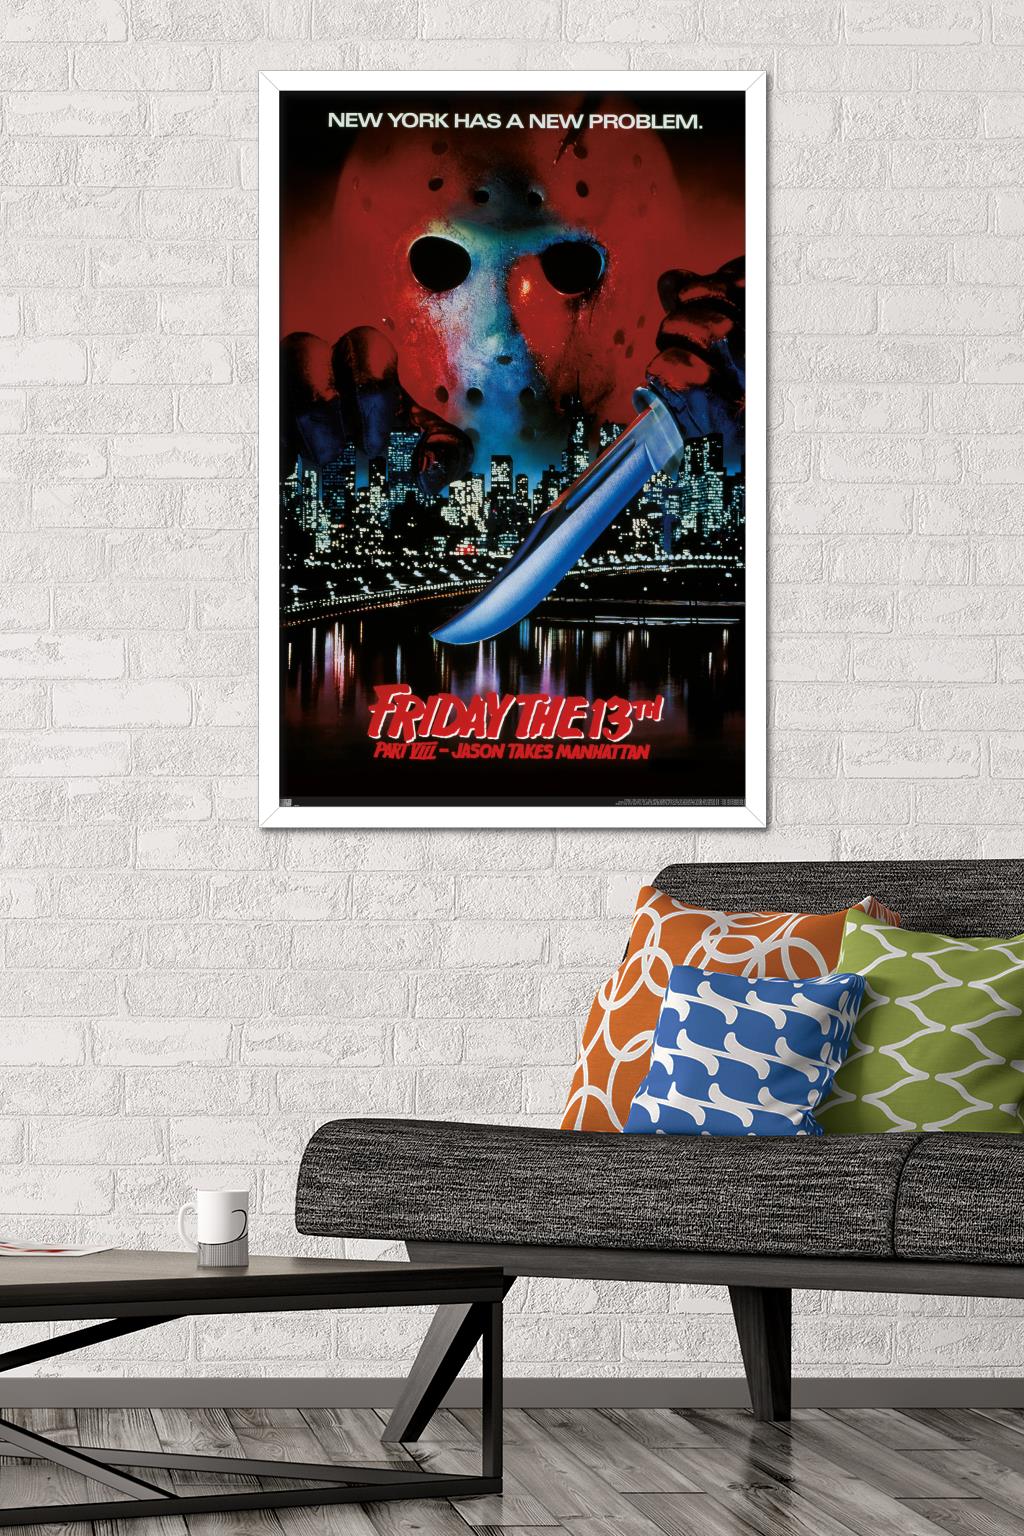 Friday The 13th Part ViII: Jason Takes Manhattan - One Sheet Wall Poster,  22.375 x 34, Framed 